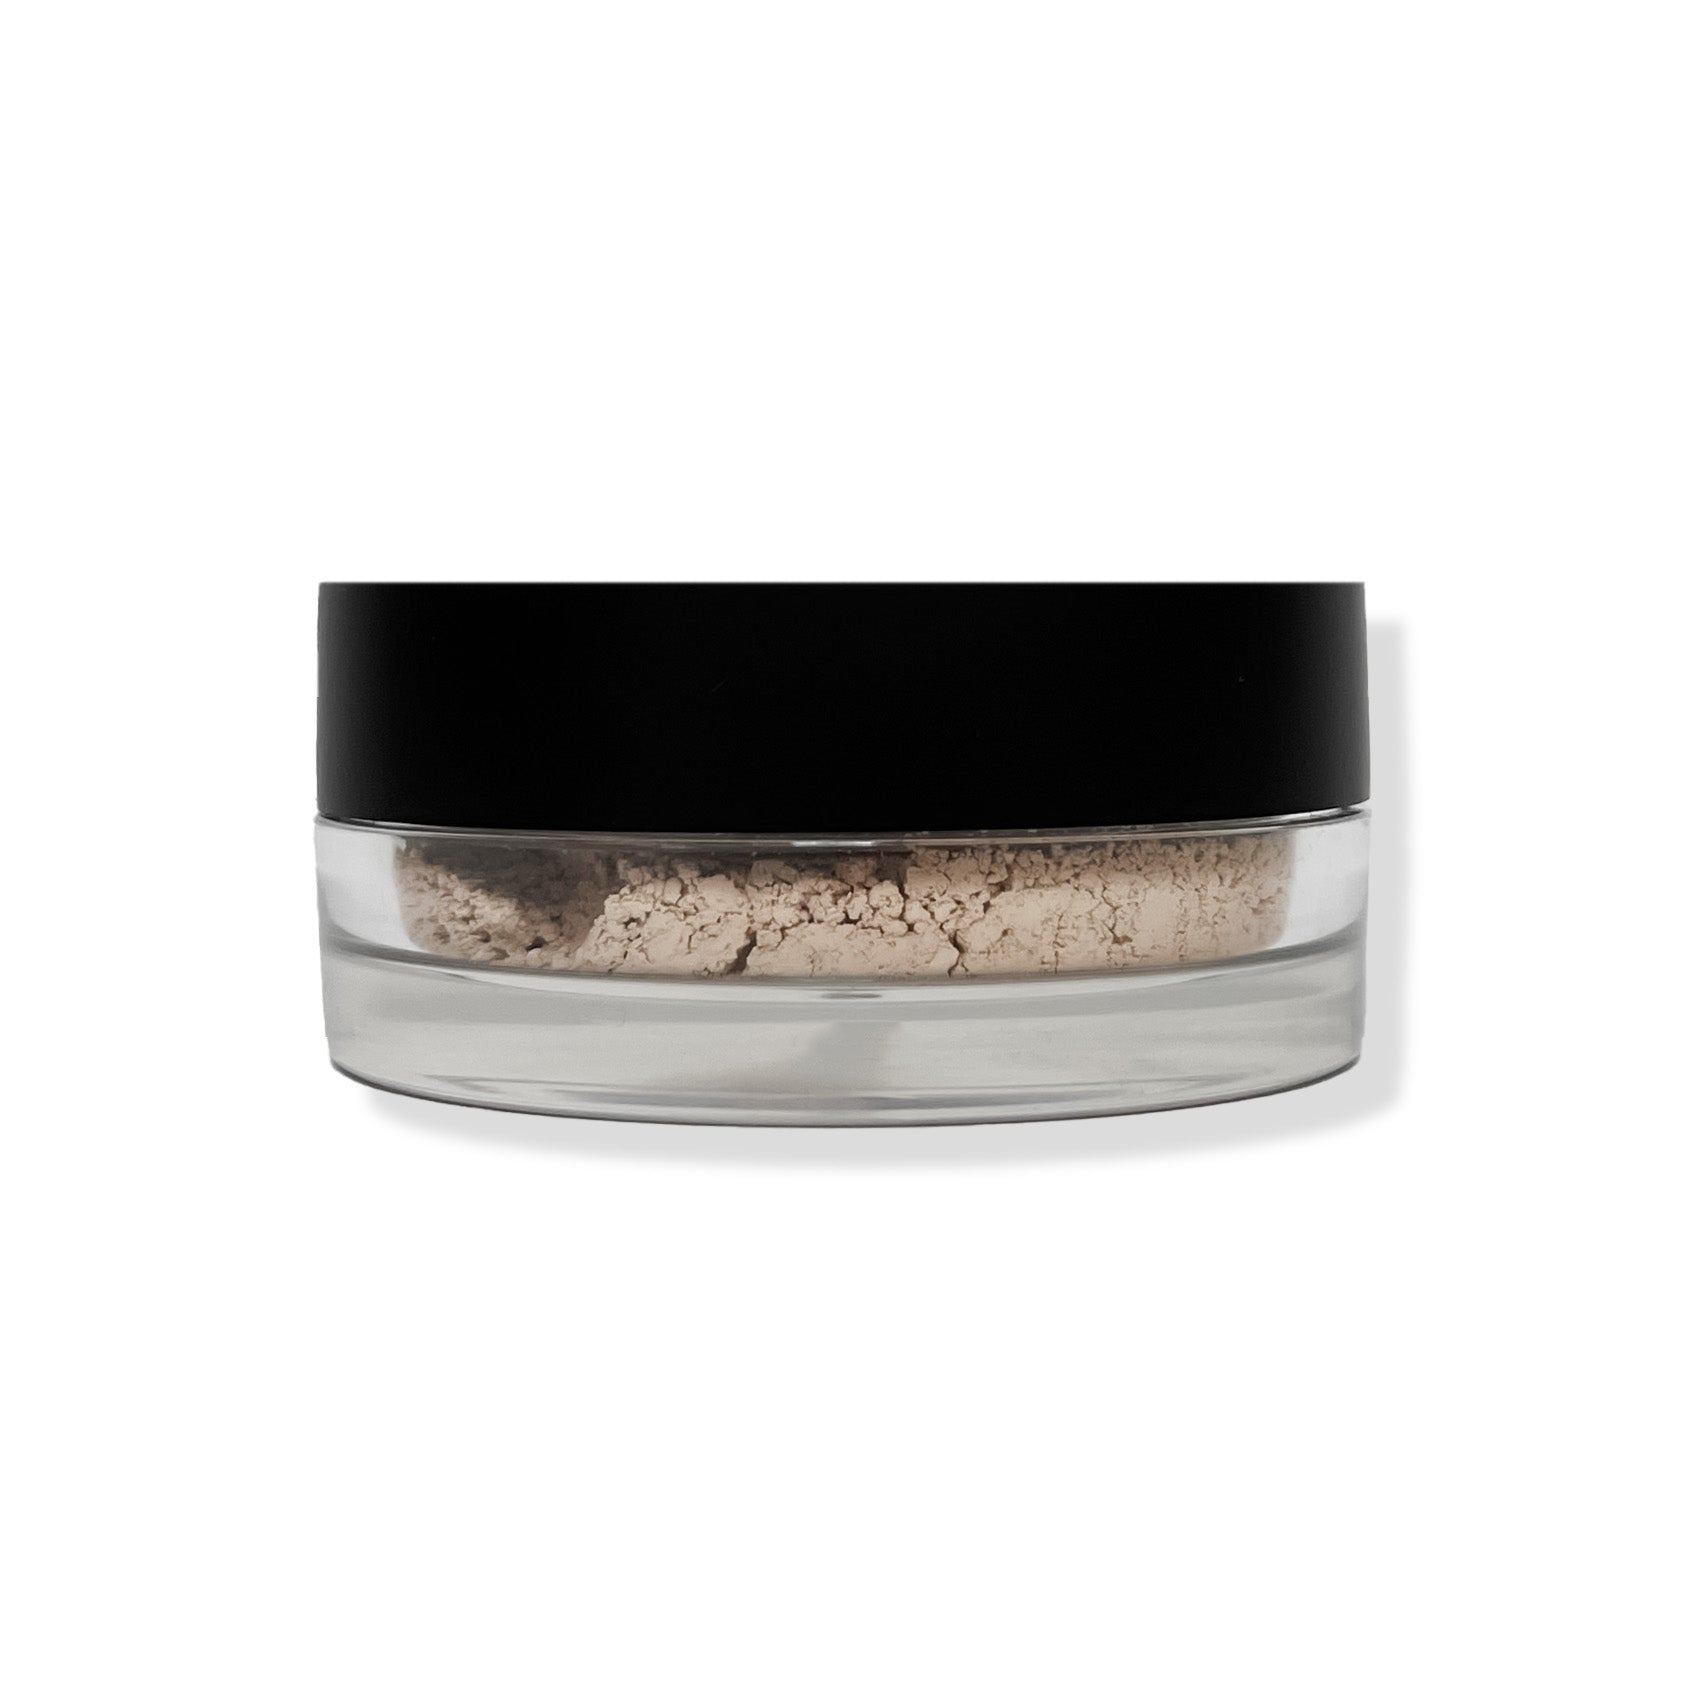 Mineral Matte Shop Makeup withSimplicity | Organic | Powder Foundation